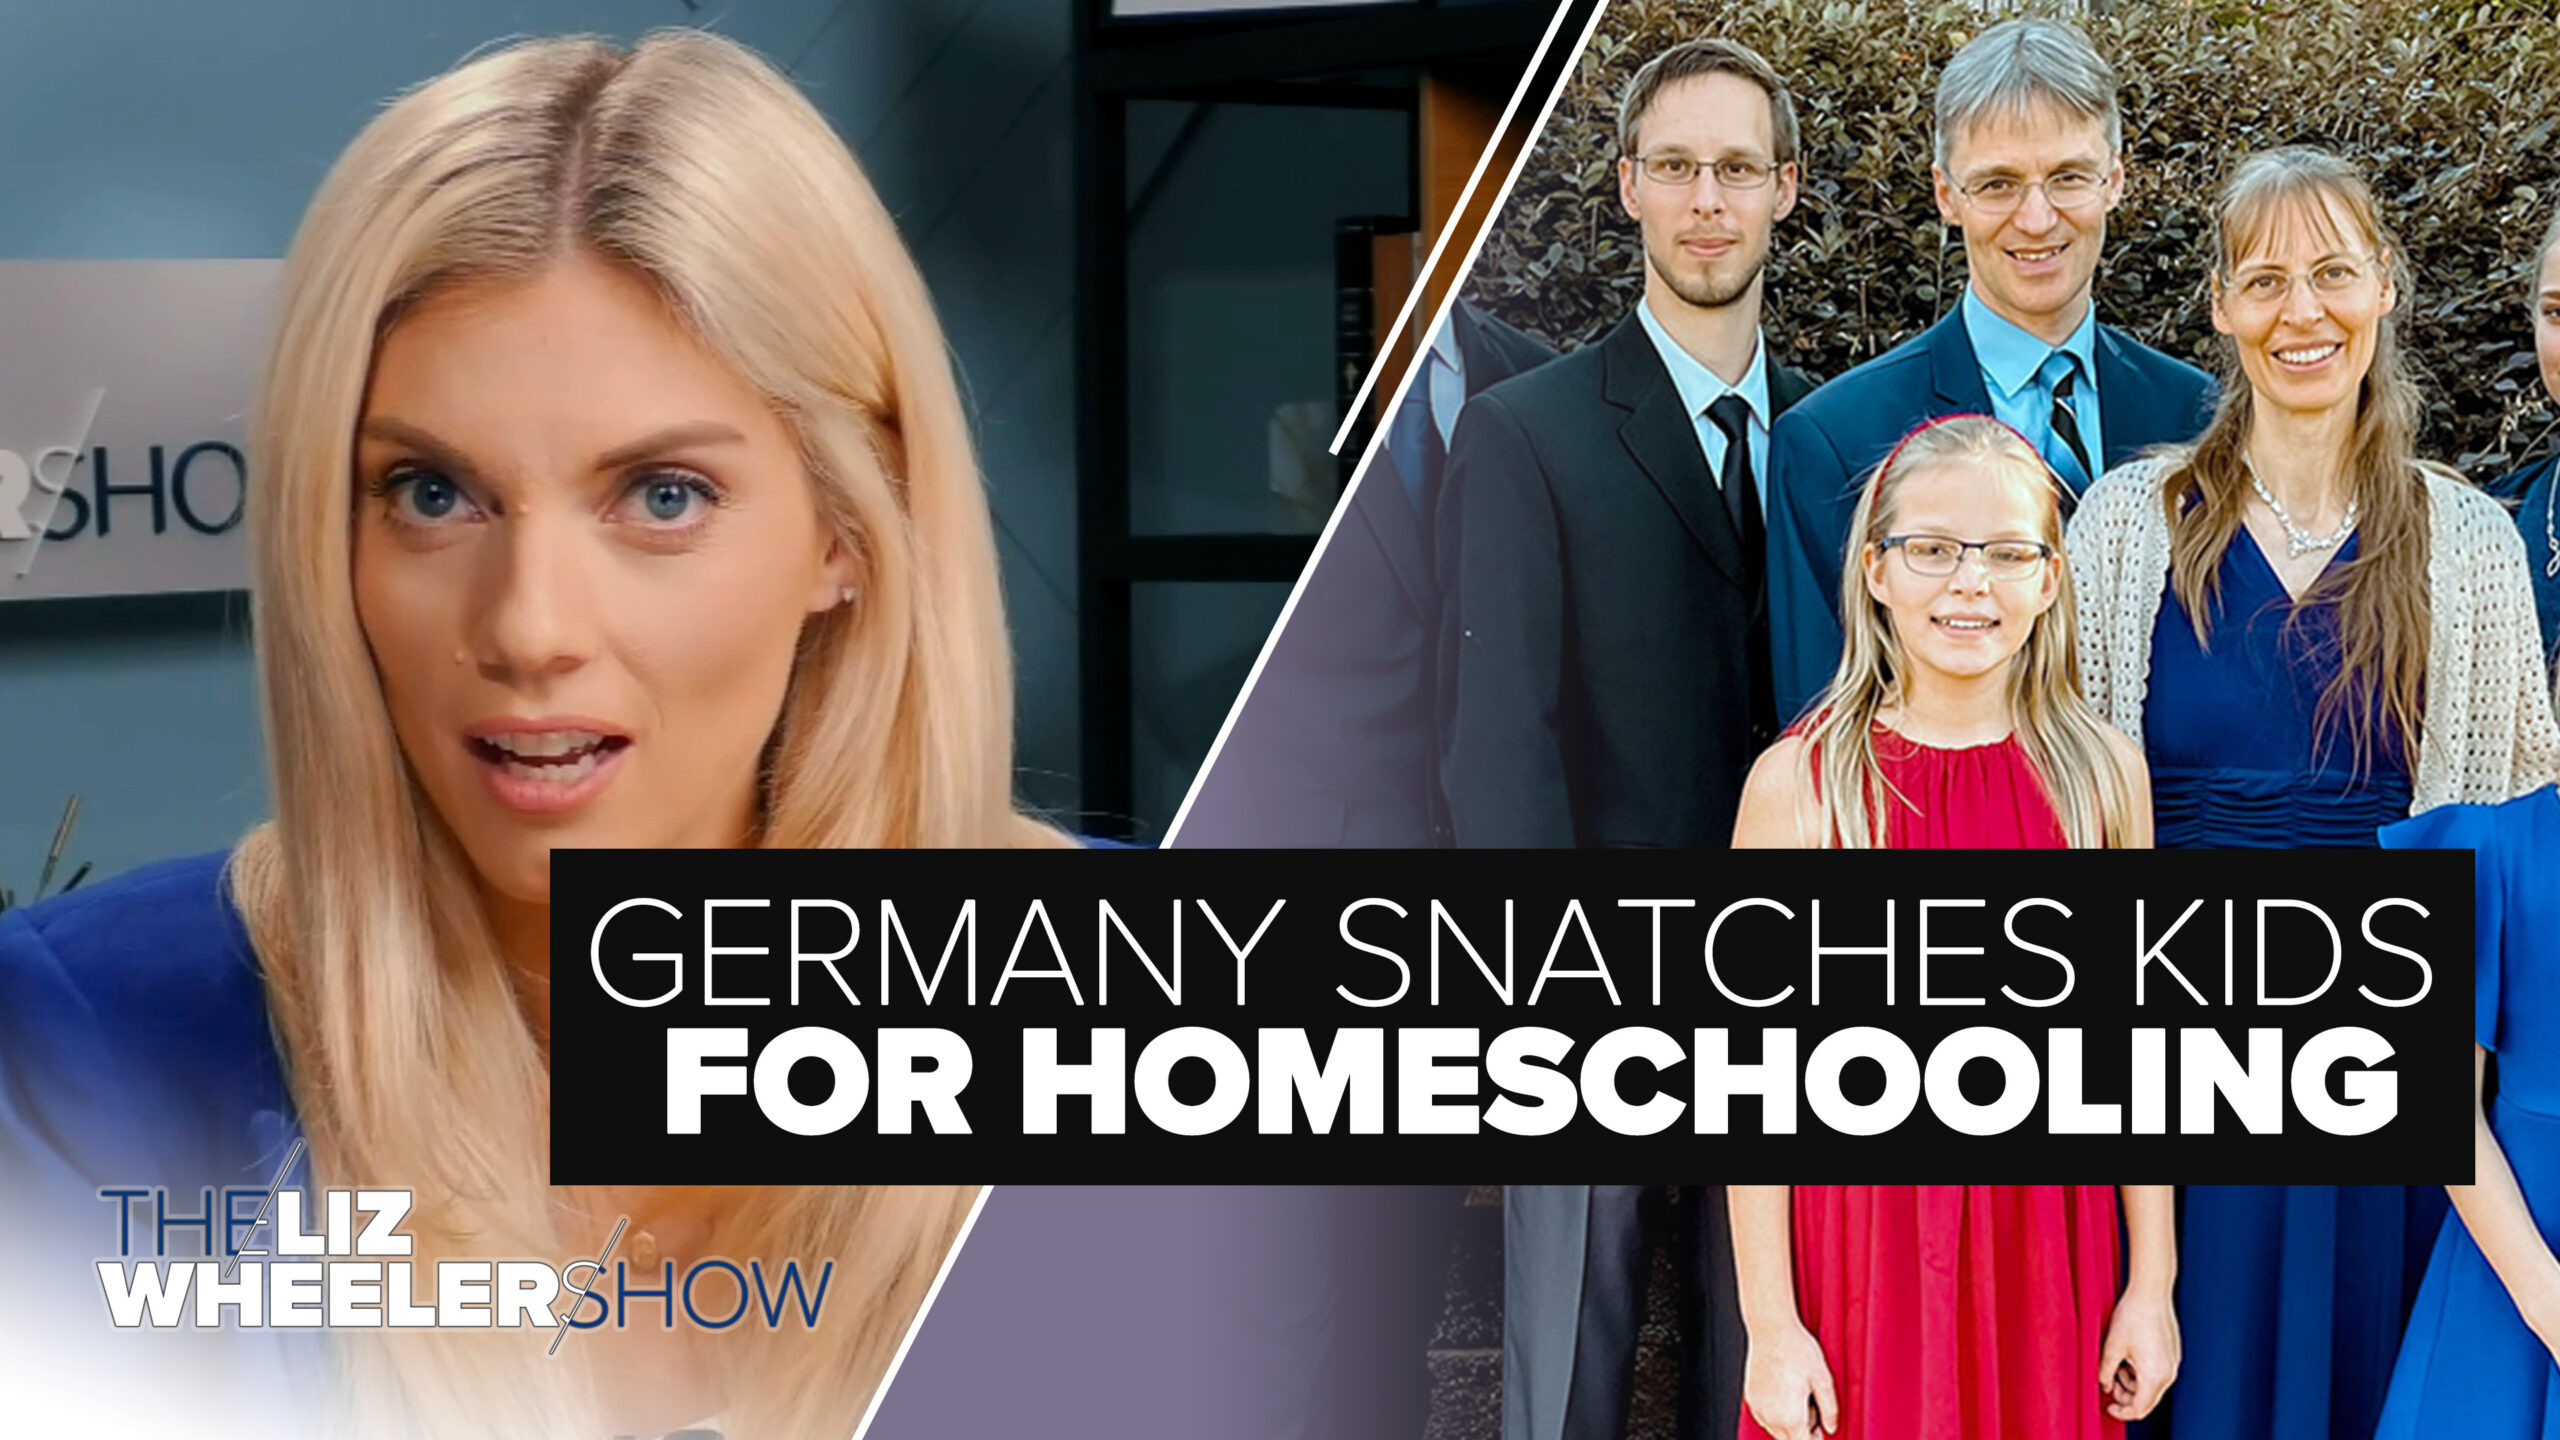 A picture shows a German family persecuted by its own government for homeschooling their children.